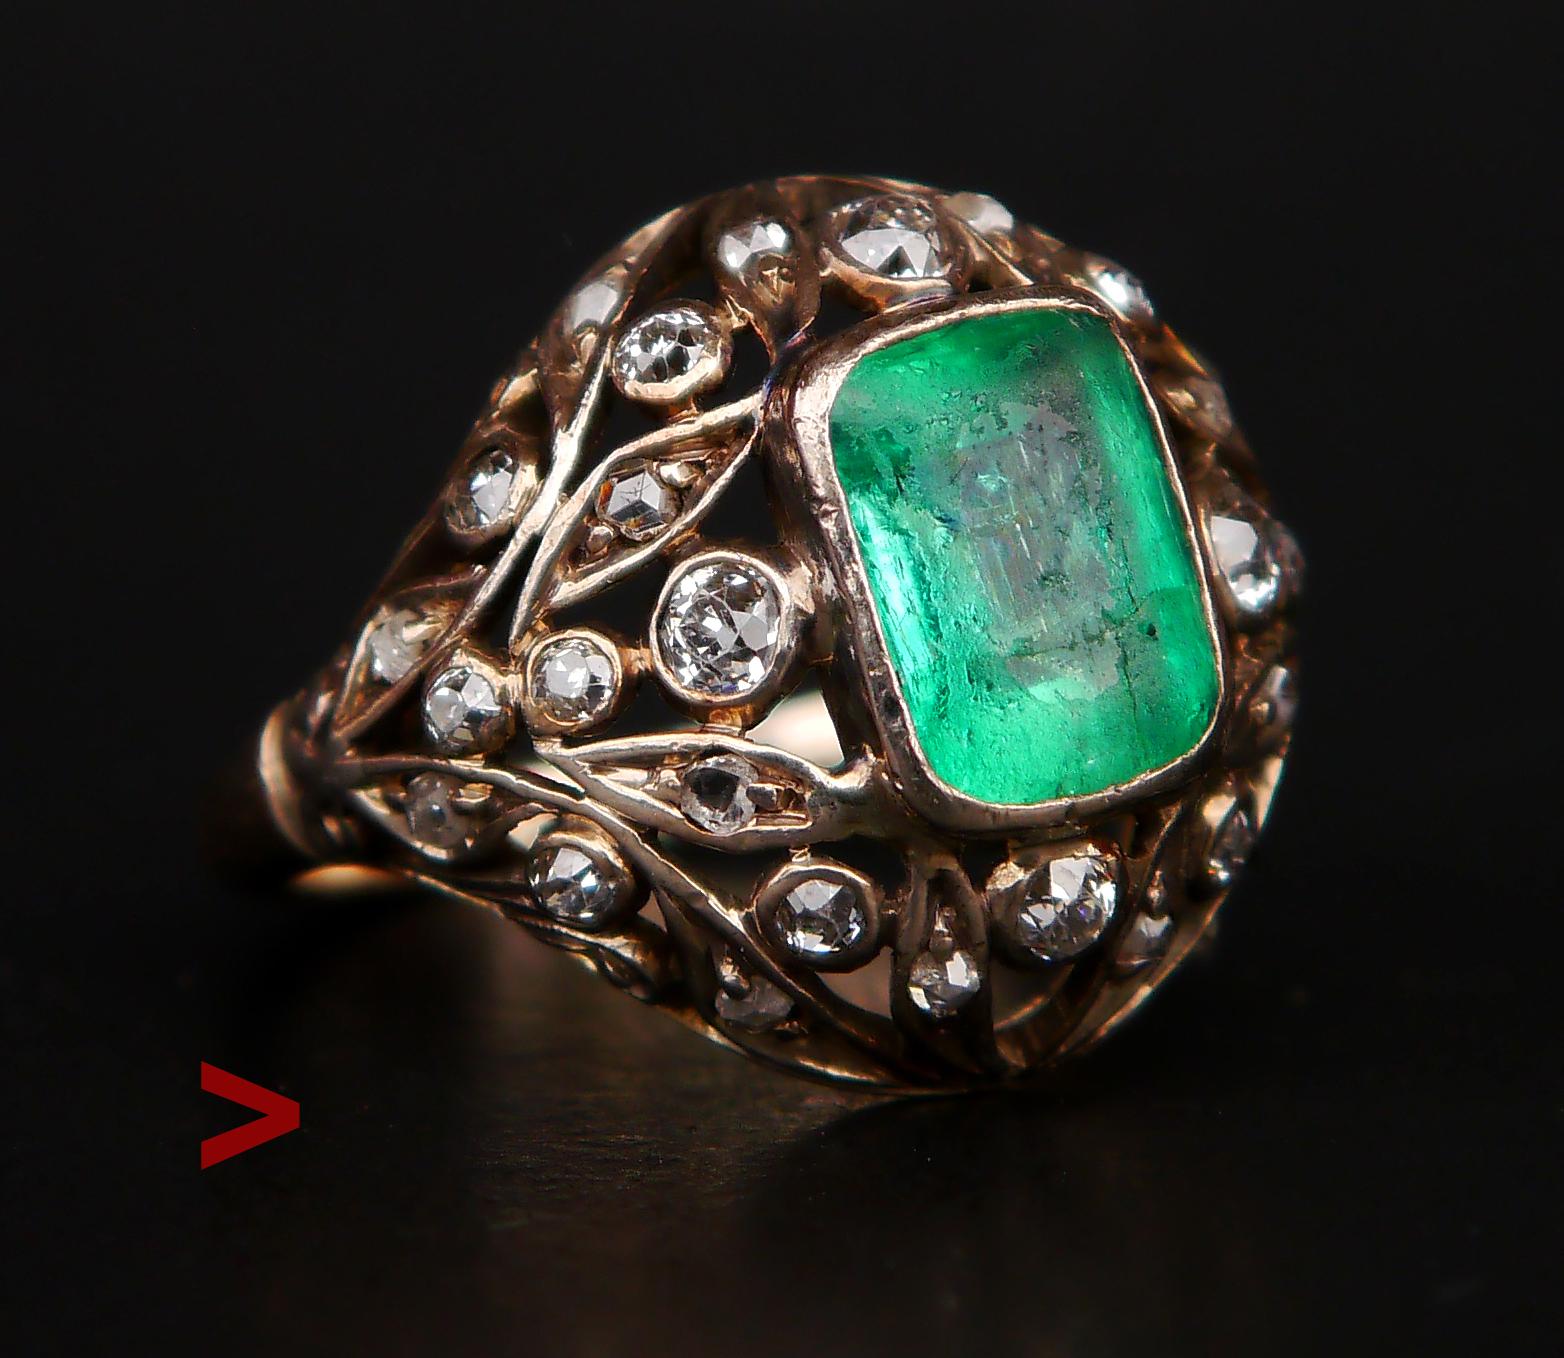 Antique ring with crown in White Gold/or Silver on 14K Green Gold band.
No hallmarks. Made ca XIX - early XX century. The band was tested 14K Green Gold.

Silver or White Gold crown with ornamental floral open work show pave set old diamond cut and